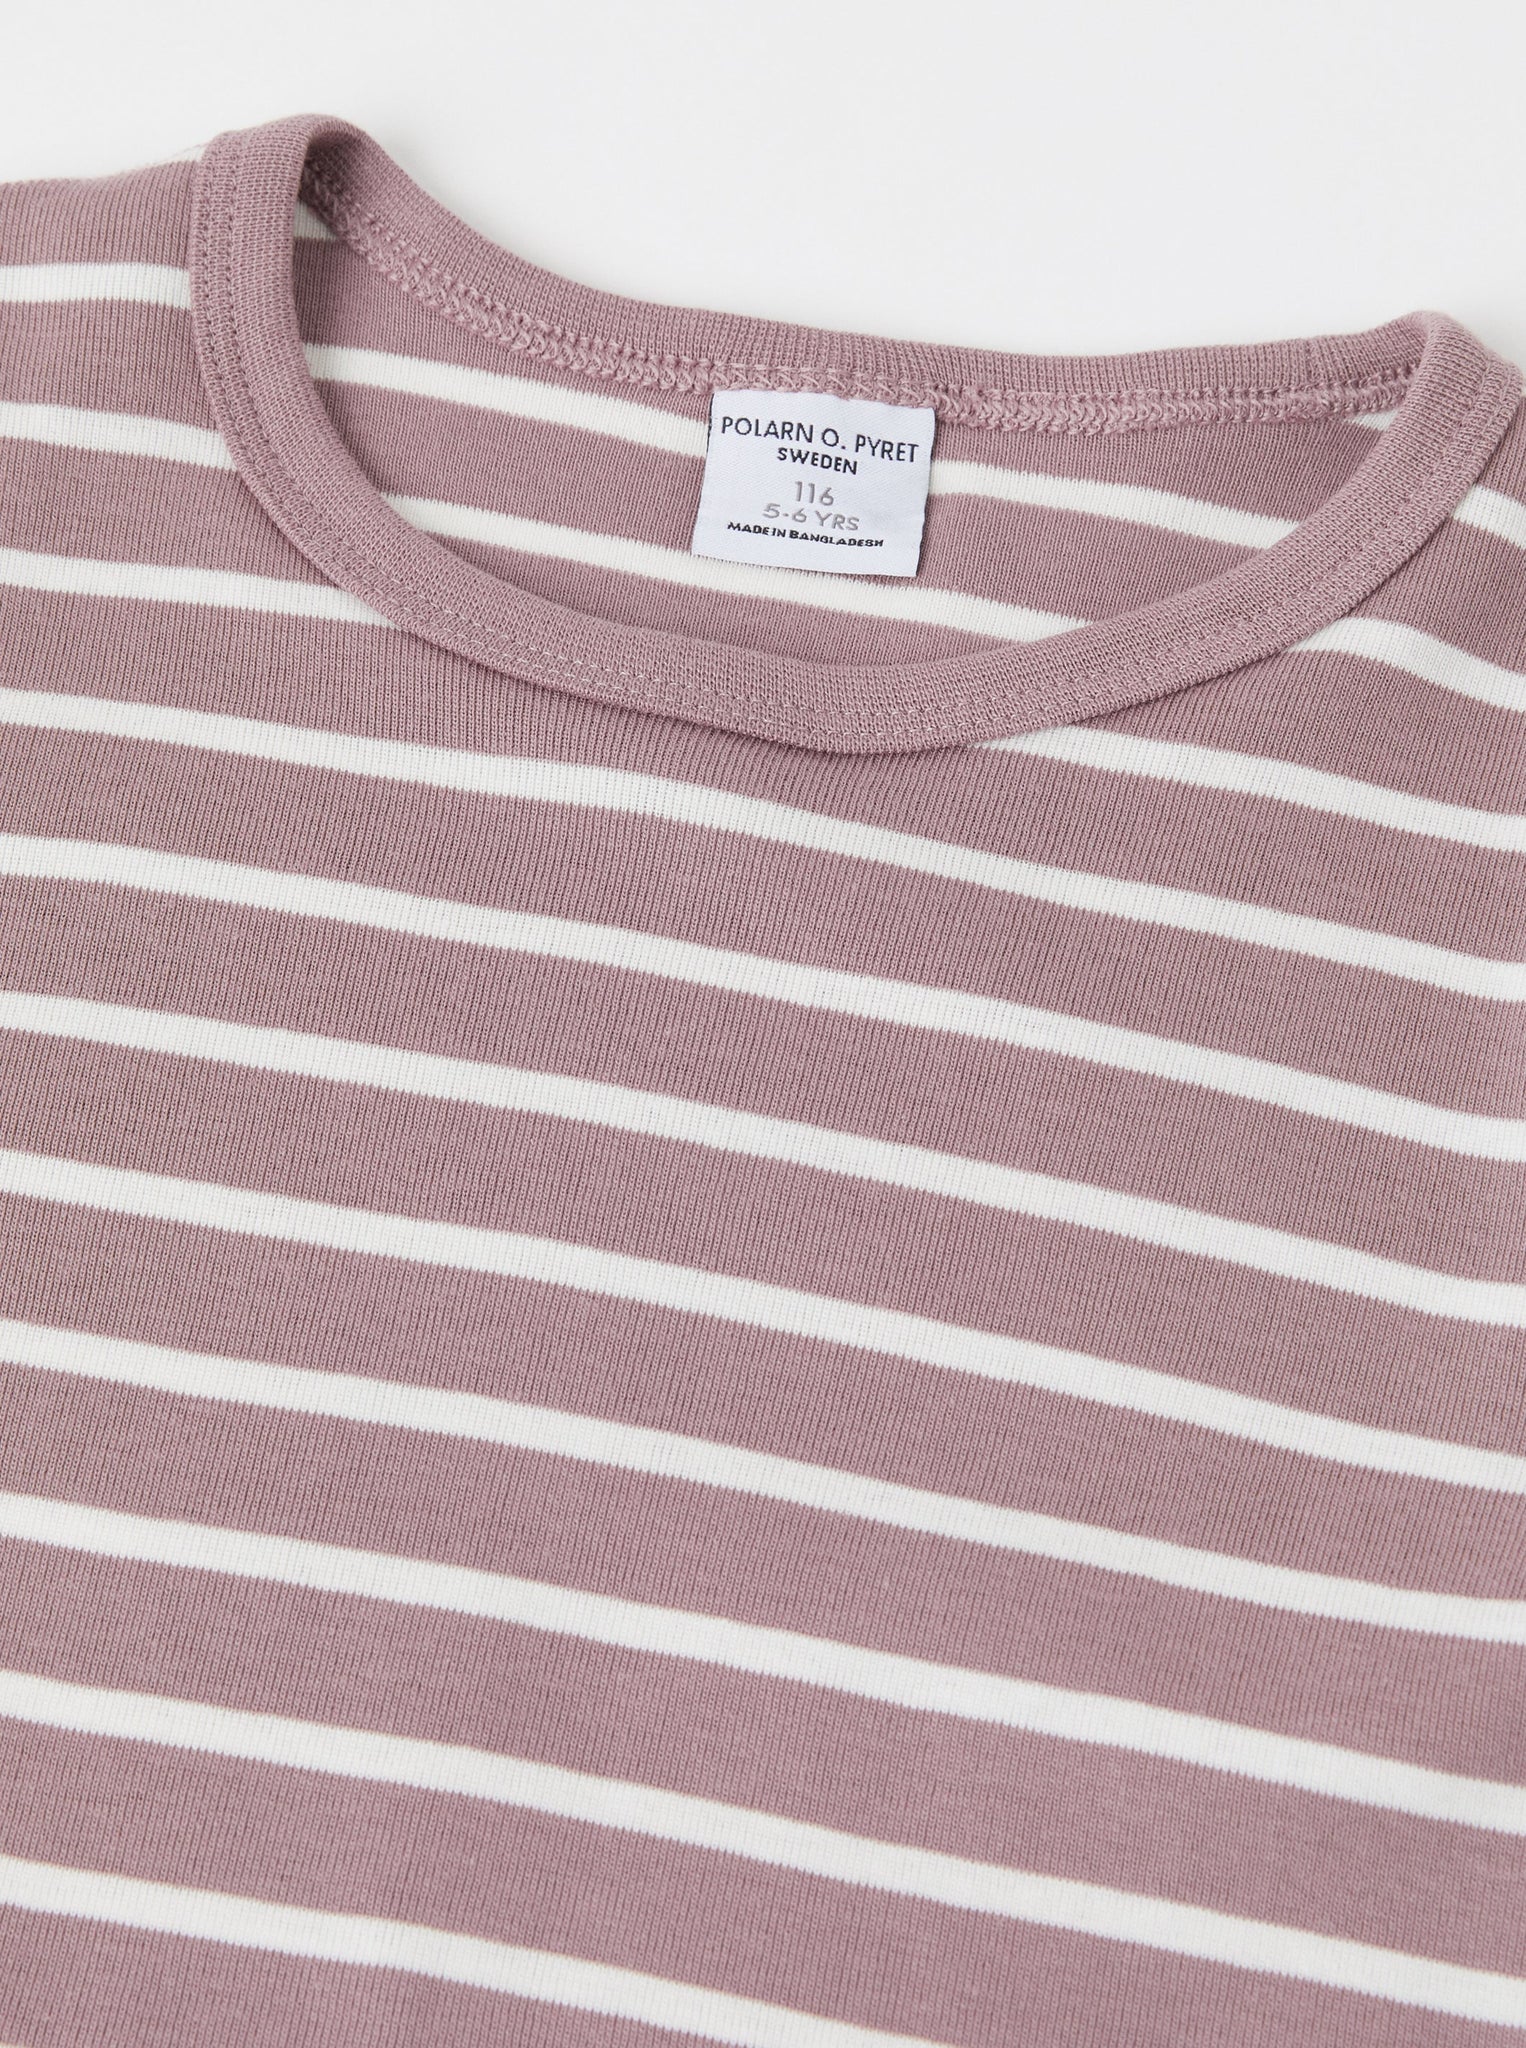 Striped Organic Cotton Purple Kids Top from the Polarn O. Pyret kidswear collection. Ethically produced kids clothing.